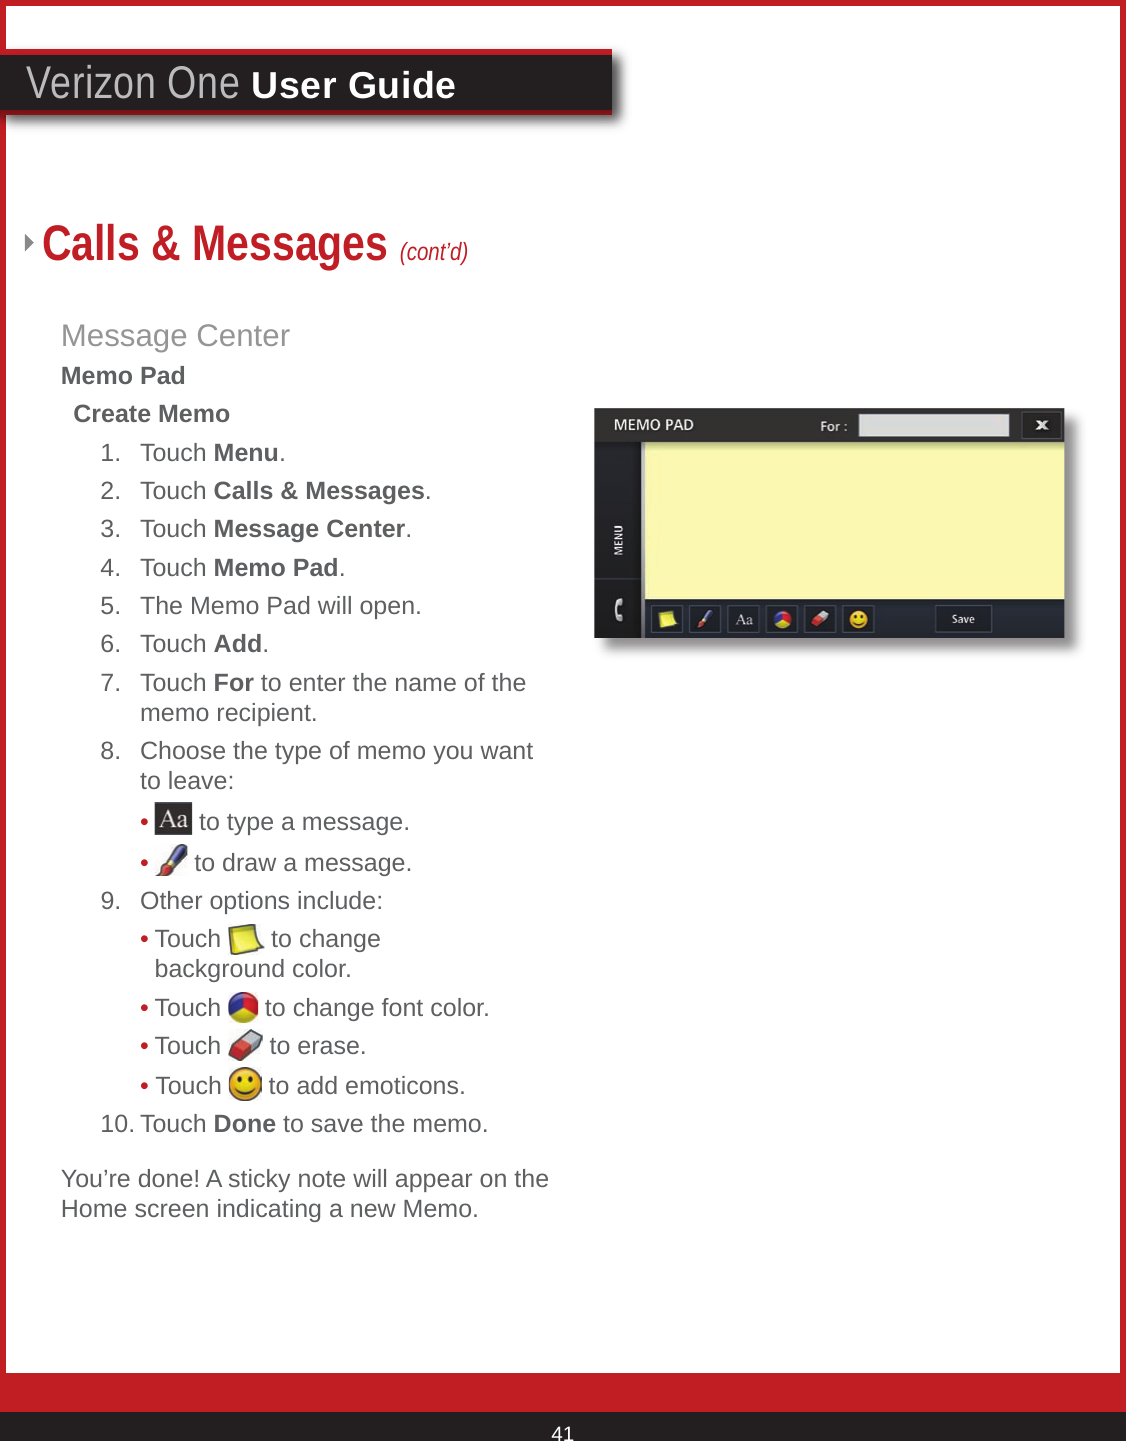 © 2007 Verizon. All Rights Reserved. 41Verizon One User GuideMessage CenterMemo Pad  Create Memo    1.  Touch Menu.   2.  Touch Calls &amp; Messages.   3.  Touch Message Center.   4.  Touch Memo Pad.   5.  The Memo Pad will open.    6.  Touch Add.   7.  Touch For to enter the name of the          memo recipient.     8.  Choose the type of memo you want          to leave:        •  to type a message.        •  to draw a message.    9.  Other options include:        • Touch   to change                background color.        • Touch   to change font color.        • Touch   to erase.        • Touch   to add emoticons.    10. Touch Done to save the memo.You’re done! A sticky note will appear on the Home screen indicating a new Memo.Calls &amp; Messages (cont’d)